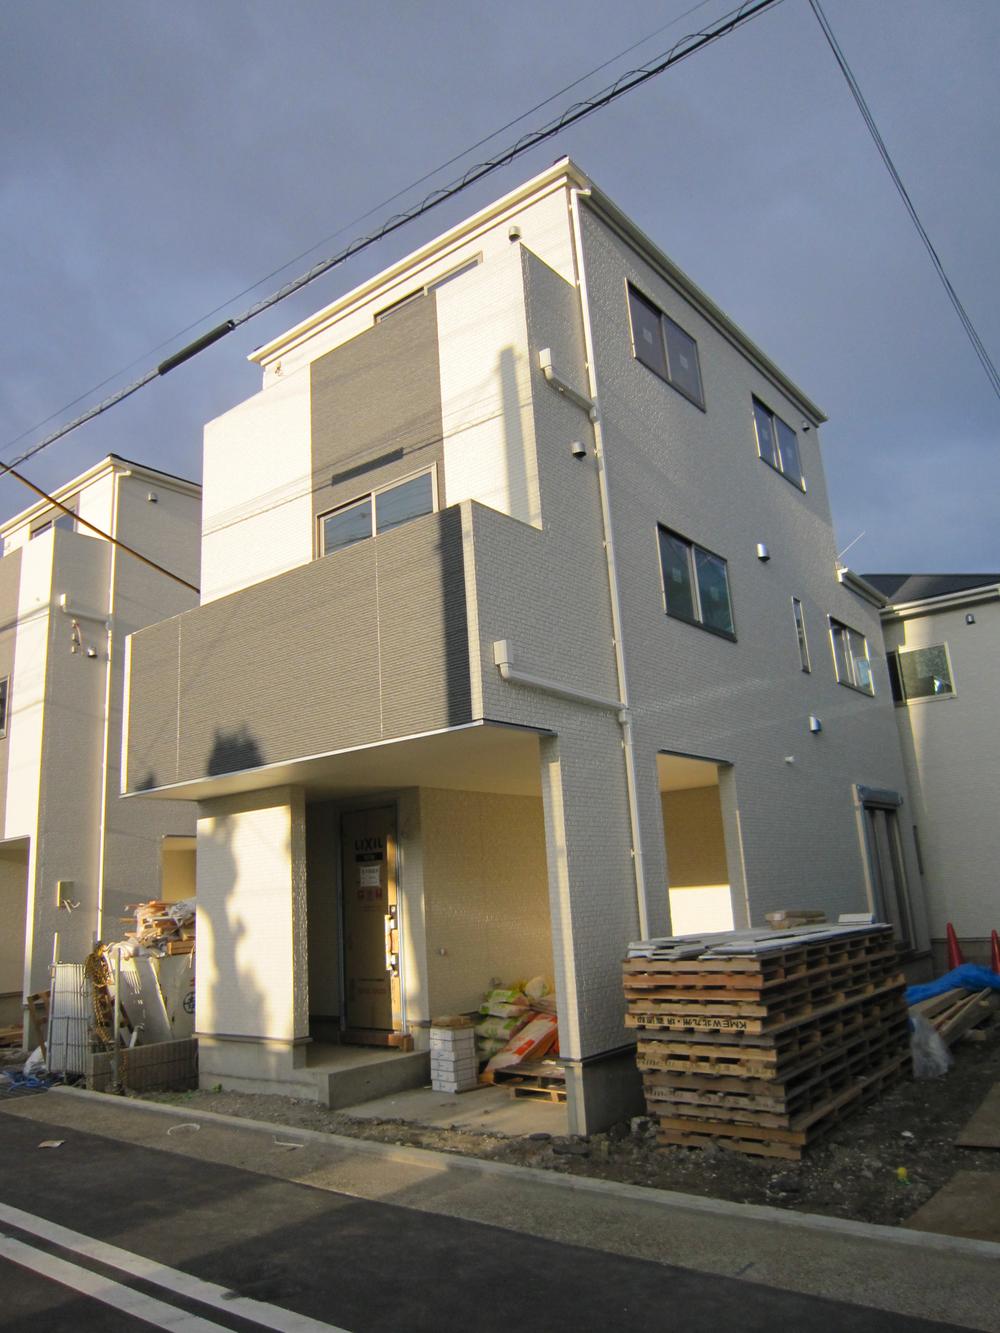 Local appearance photo. Building 2 (2013 December 21 shooting)